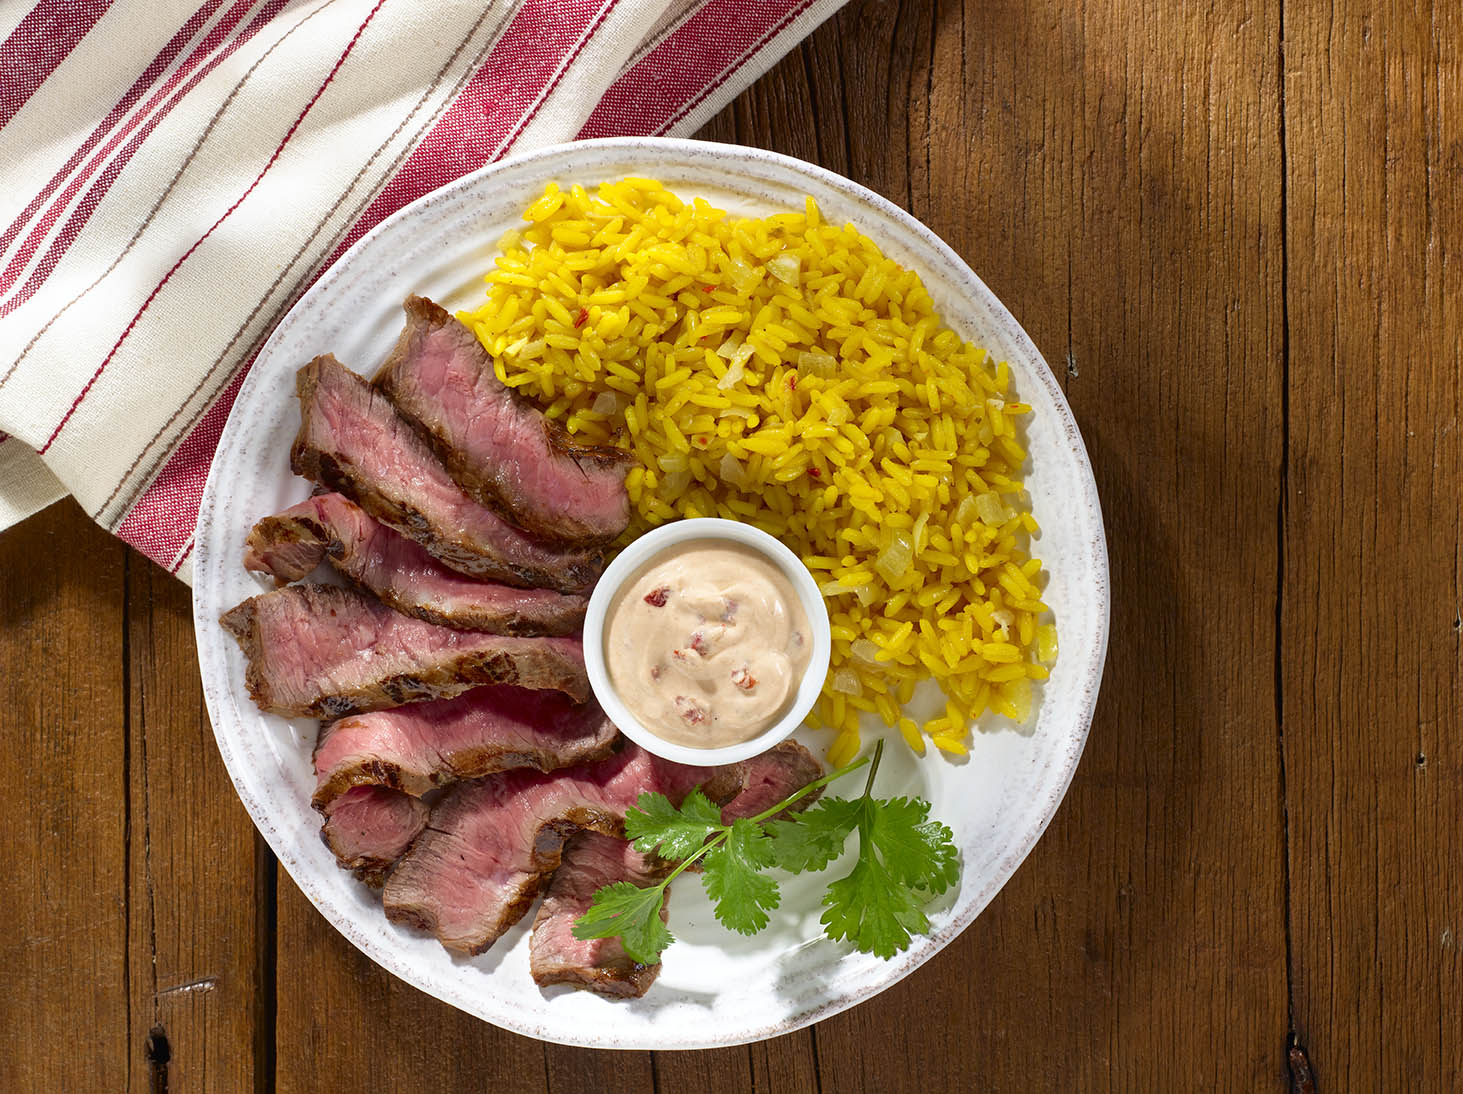 Chipotle-Spiced Steak with Garlic Yellow Rice